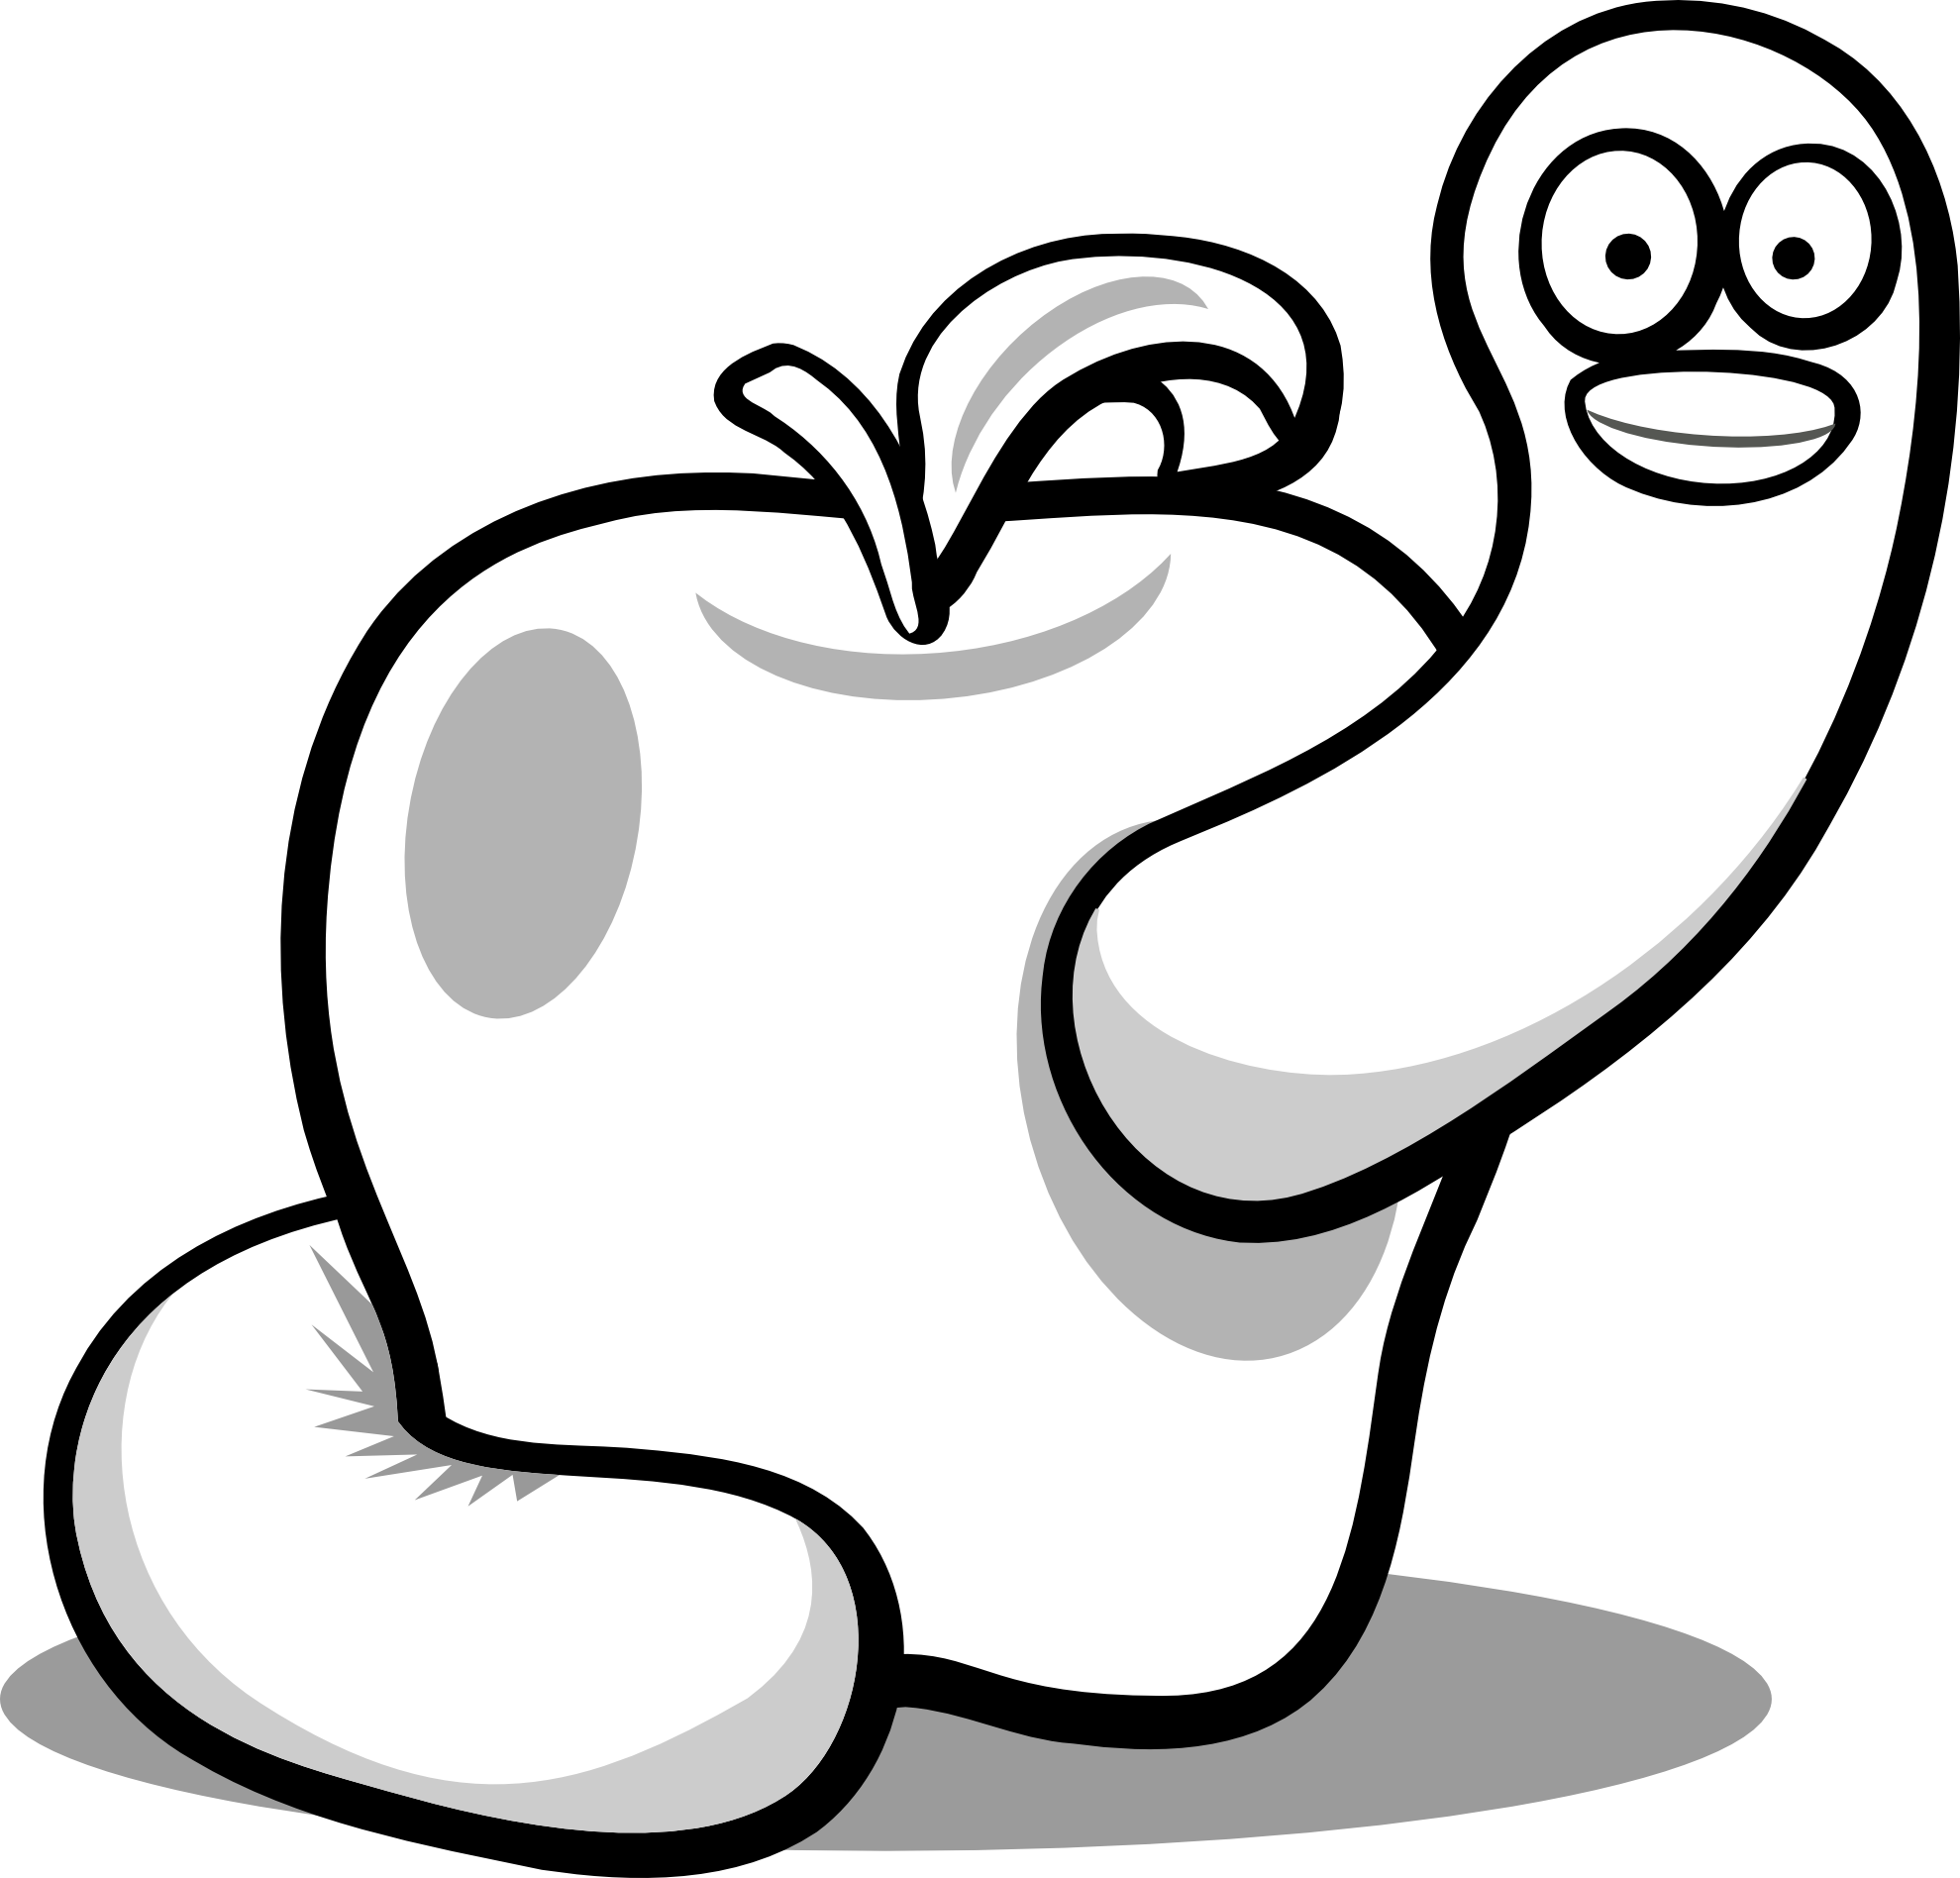 Worm clipart printable. Snake black and white